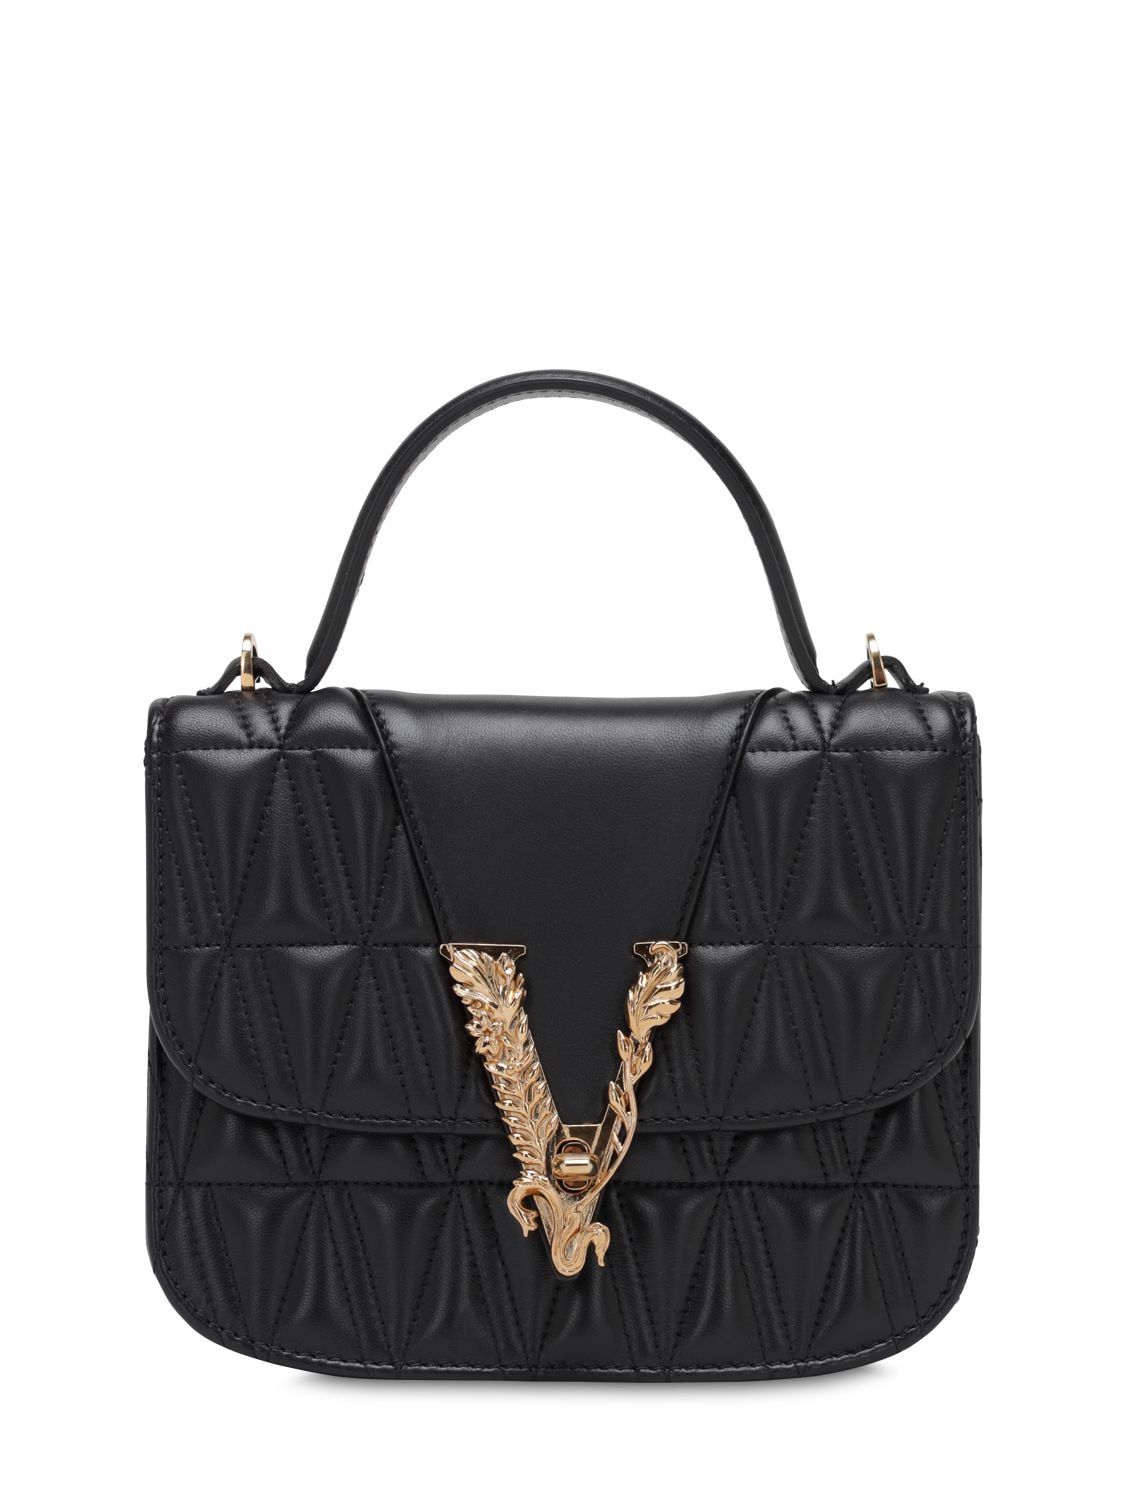 Versace Virtus Quilted Leather Top Handle Bag In Black | ModeSens